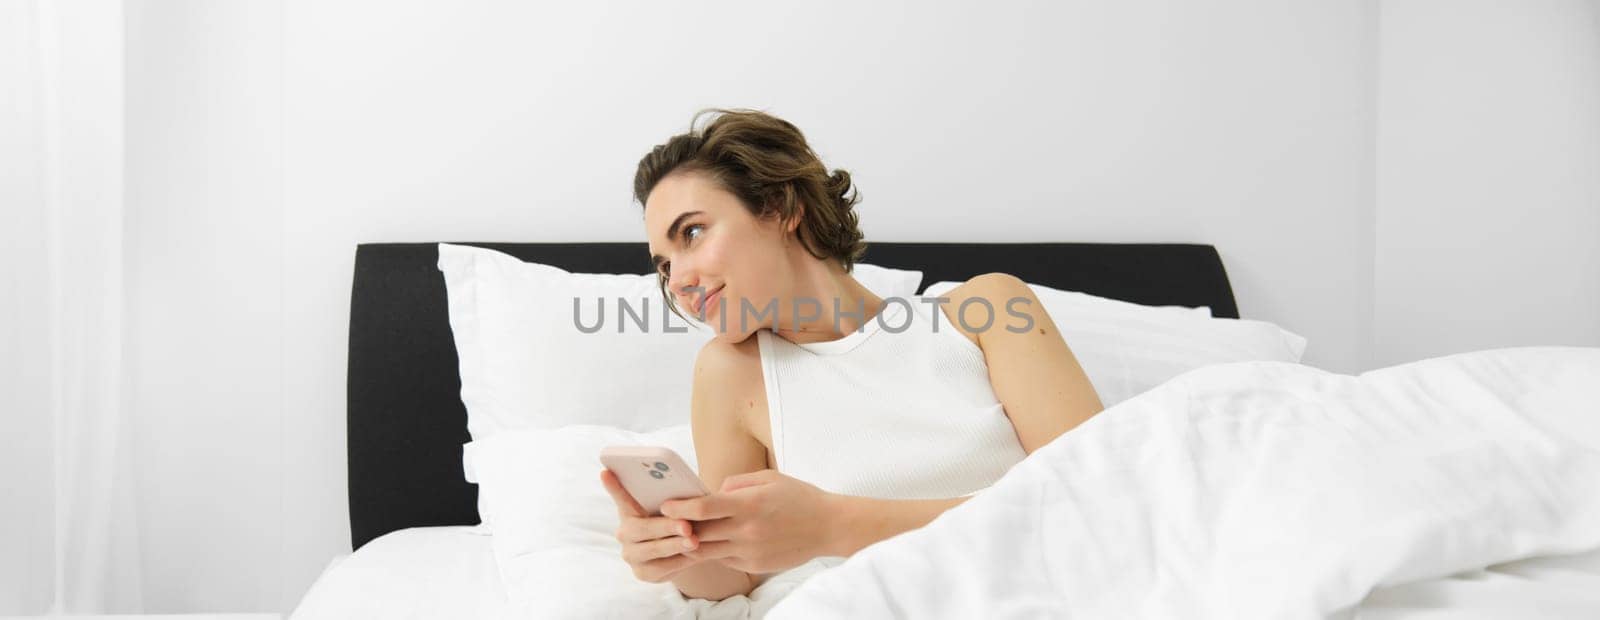 Portrait of woman in bed, lying on white sheets, using smartphone, holding mobile phone. Lifestyle and technology concept